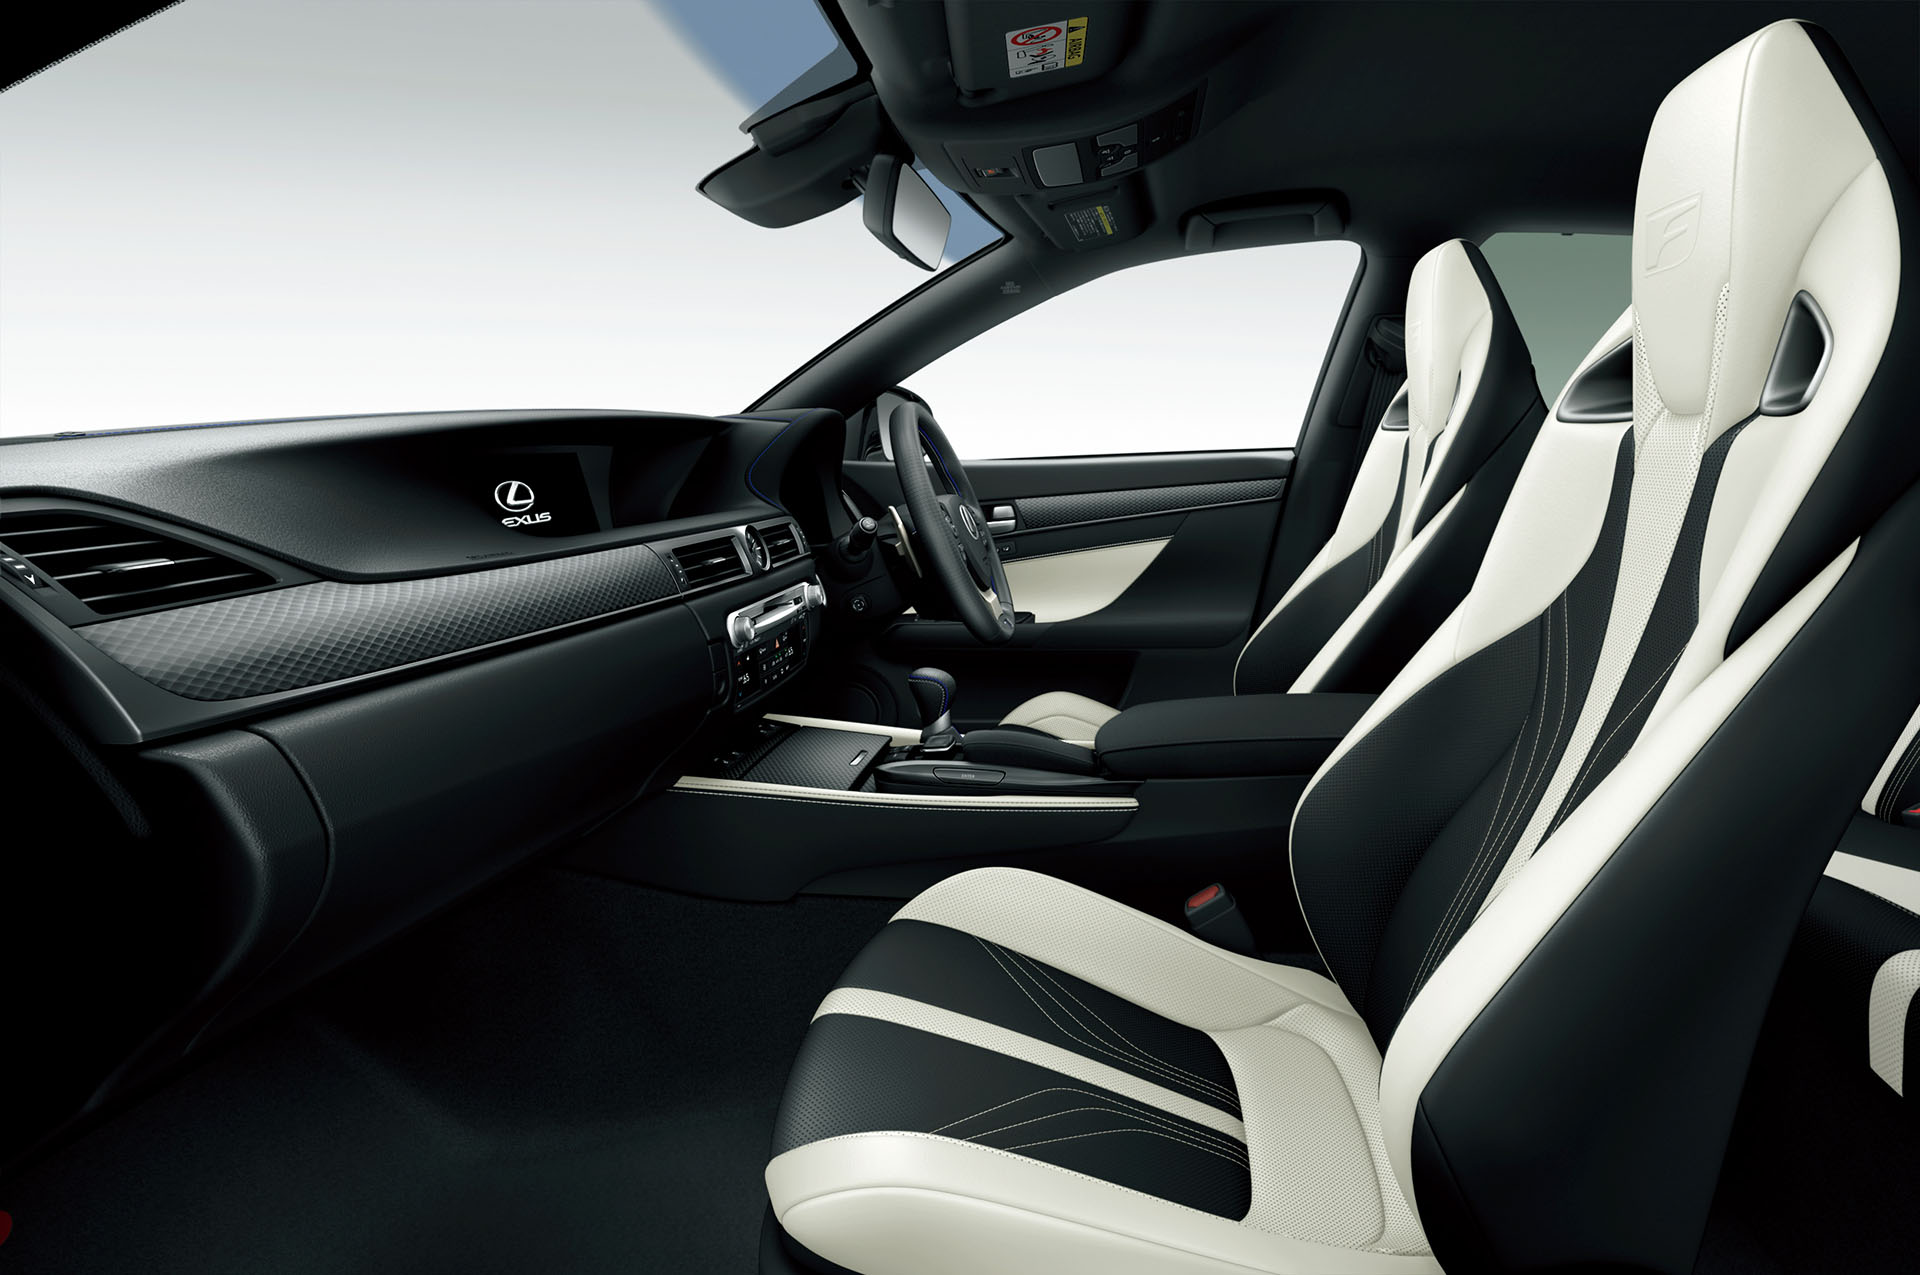 GS F (Black and Accent White interior color; options shown)